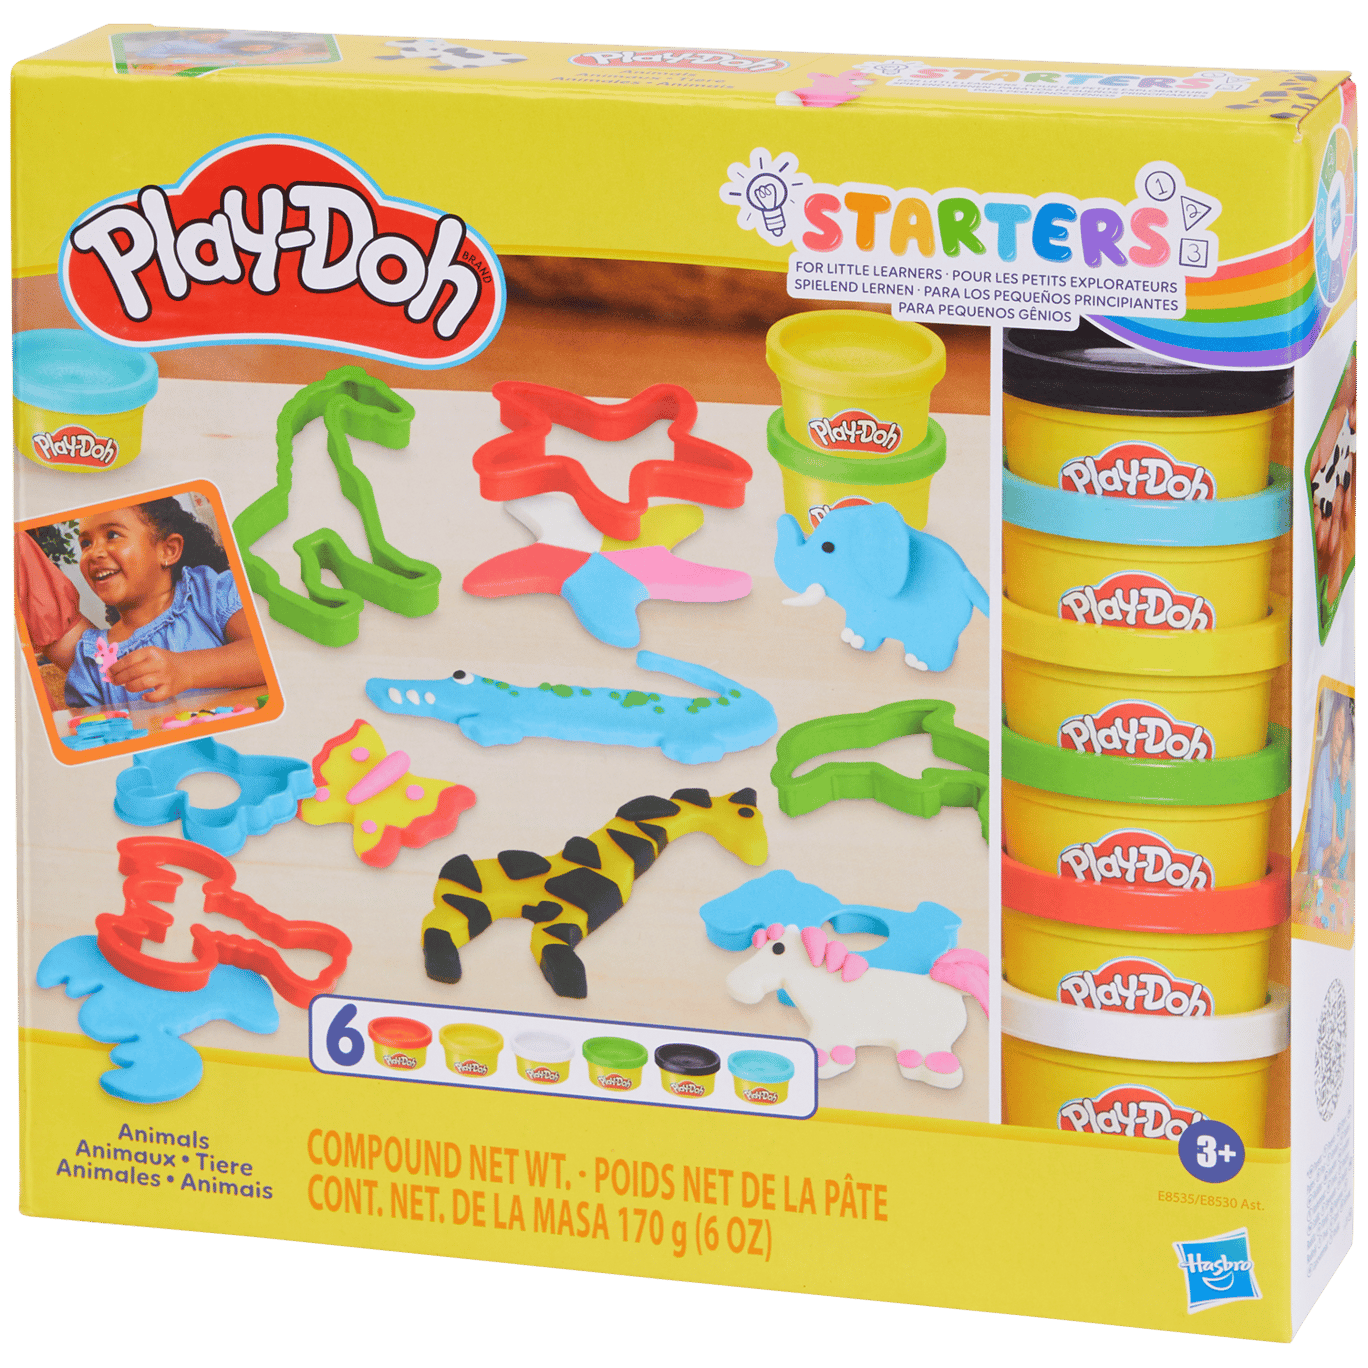 Play-Doh Starters